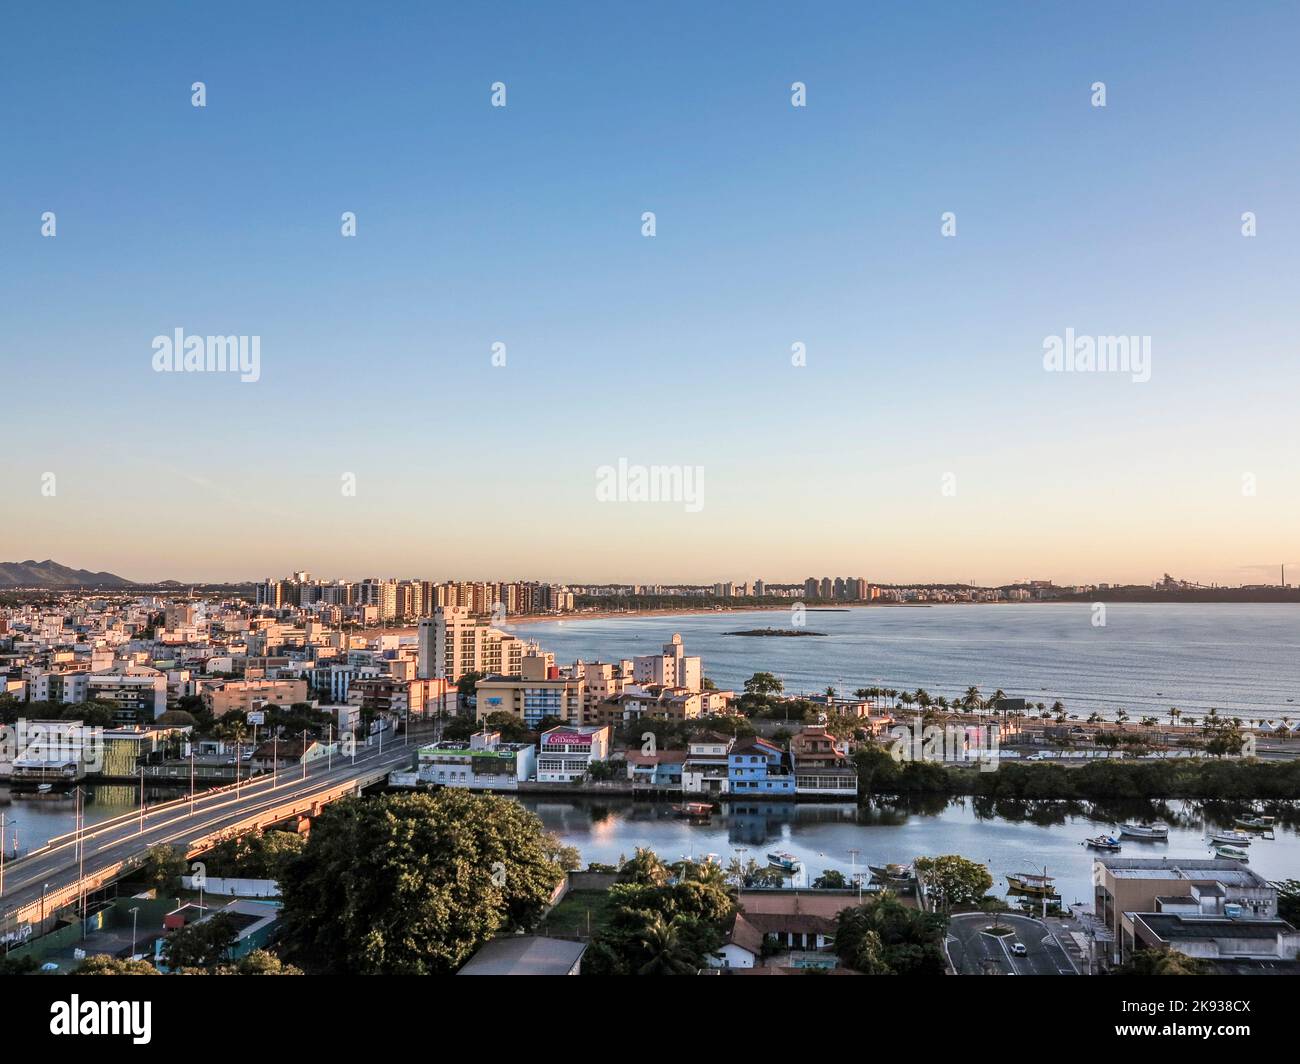 VITORIA, BRAZIL - OCT 27, 2013: aerial of Vitoria, Brazil in sunset. Vitoria has a population of 313 tst people in 2005 and covers an area of 93 squar Stock Photo